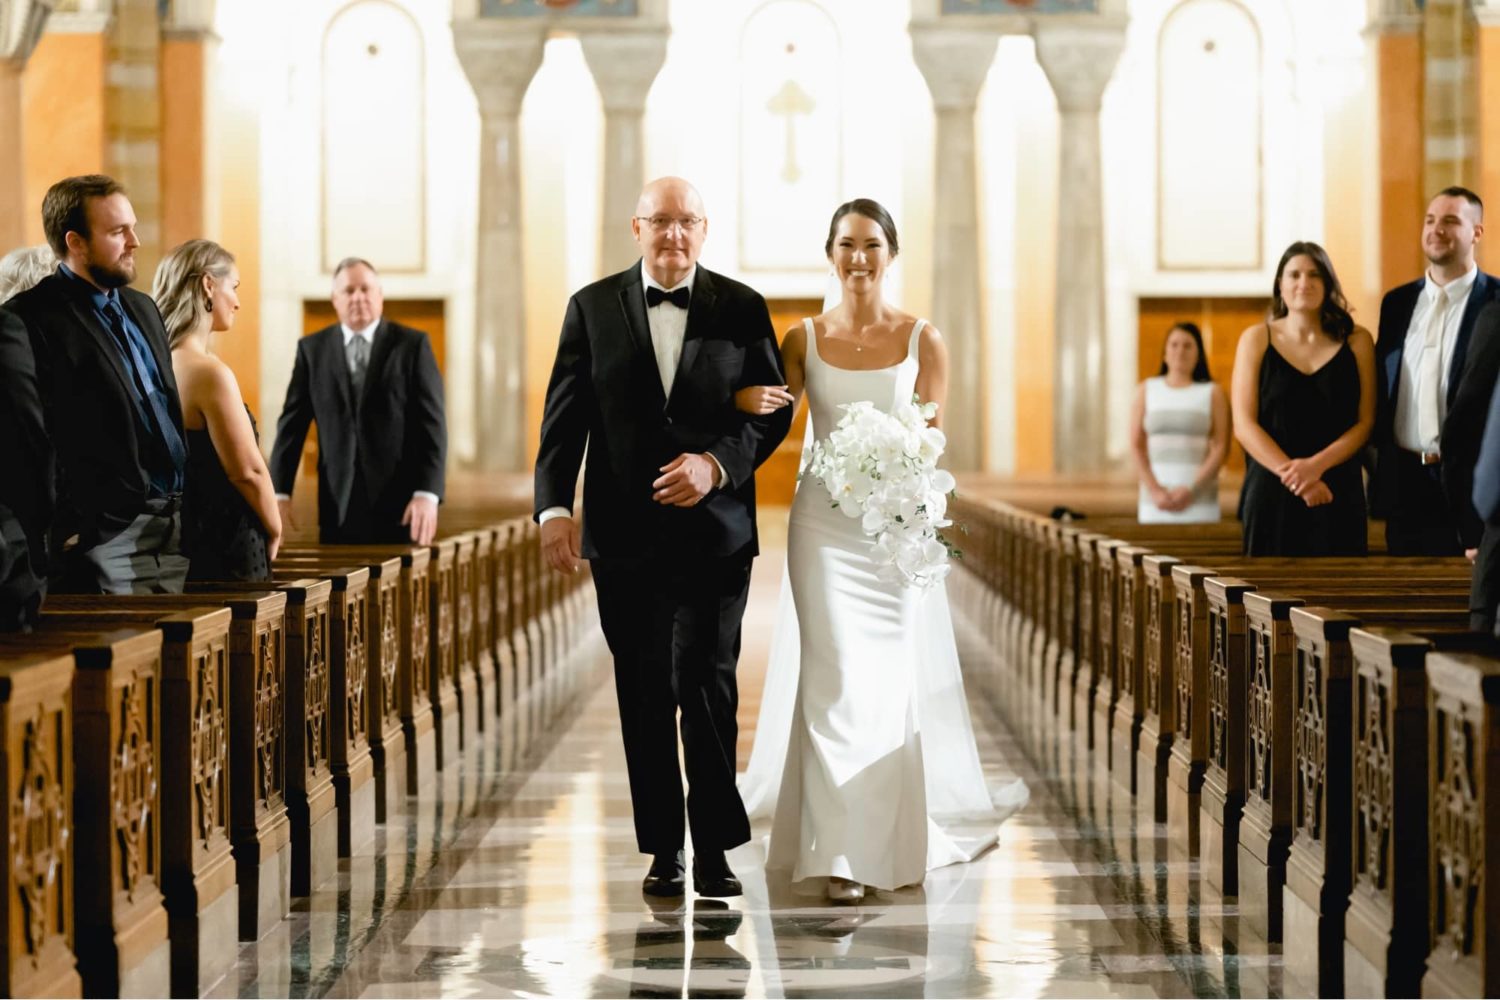 Father of the bride walking bride down the aisle at the Cathedral Basilica of St. Louis